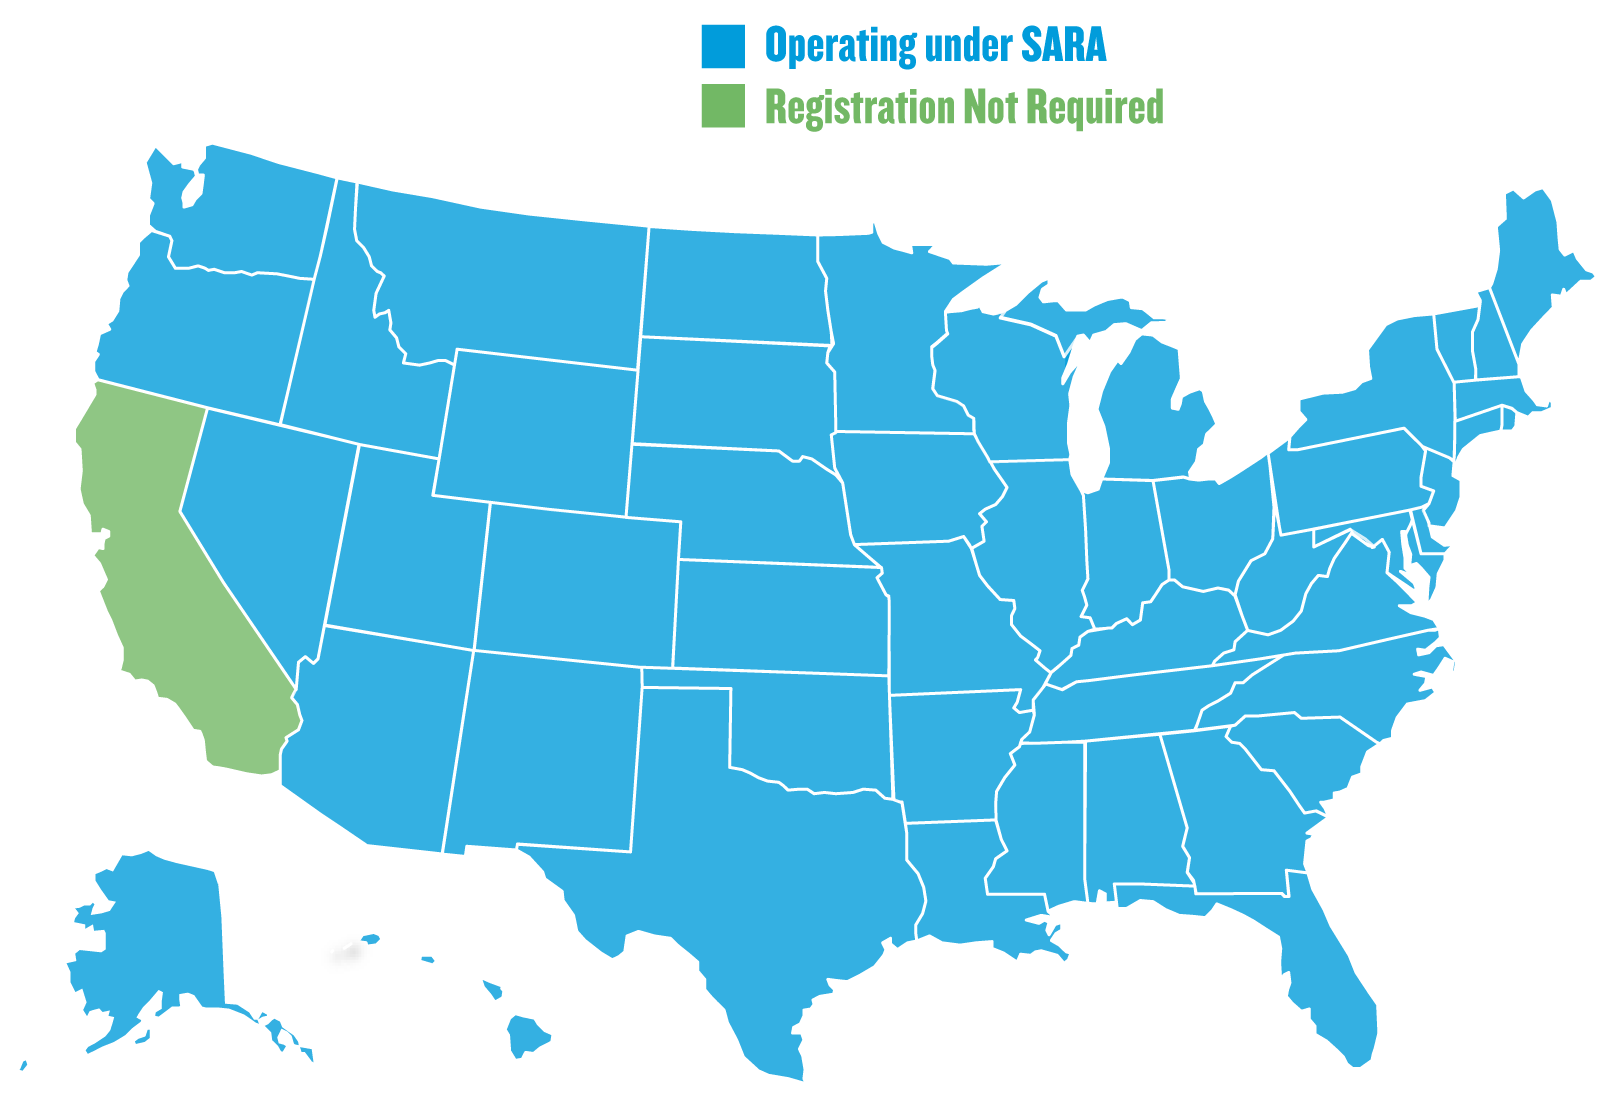 US map denoting which states Creighton is operating under the SARA